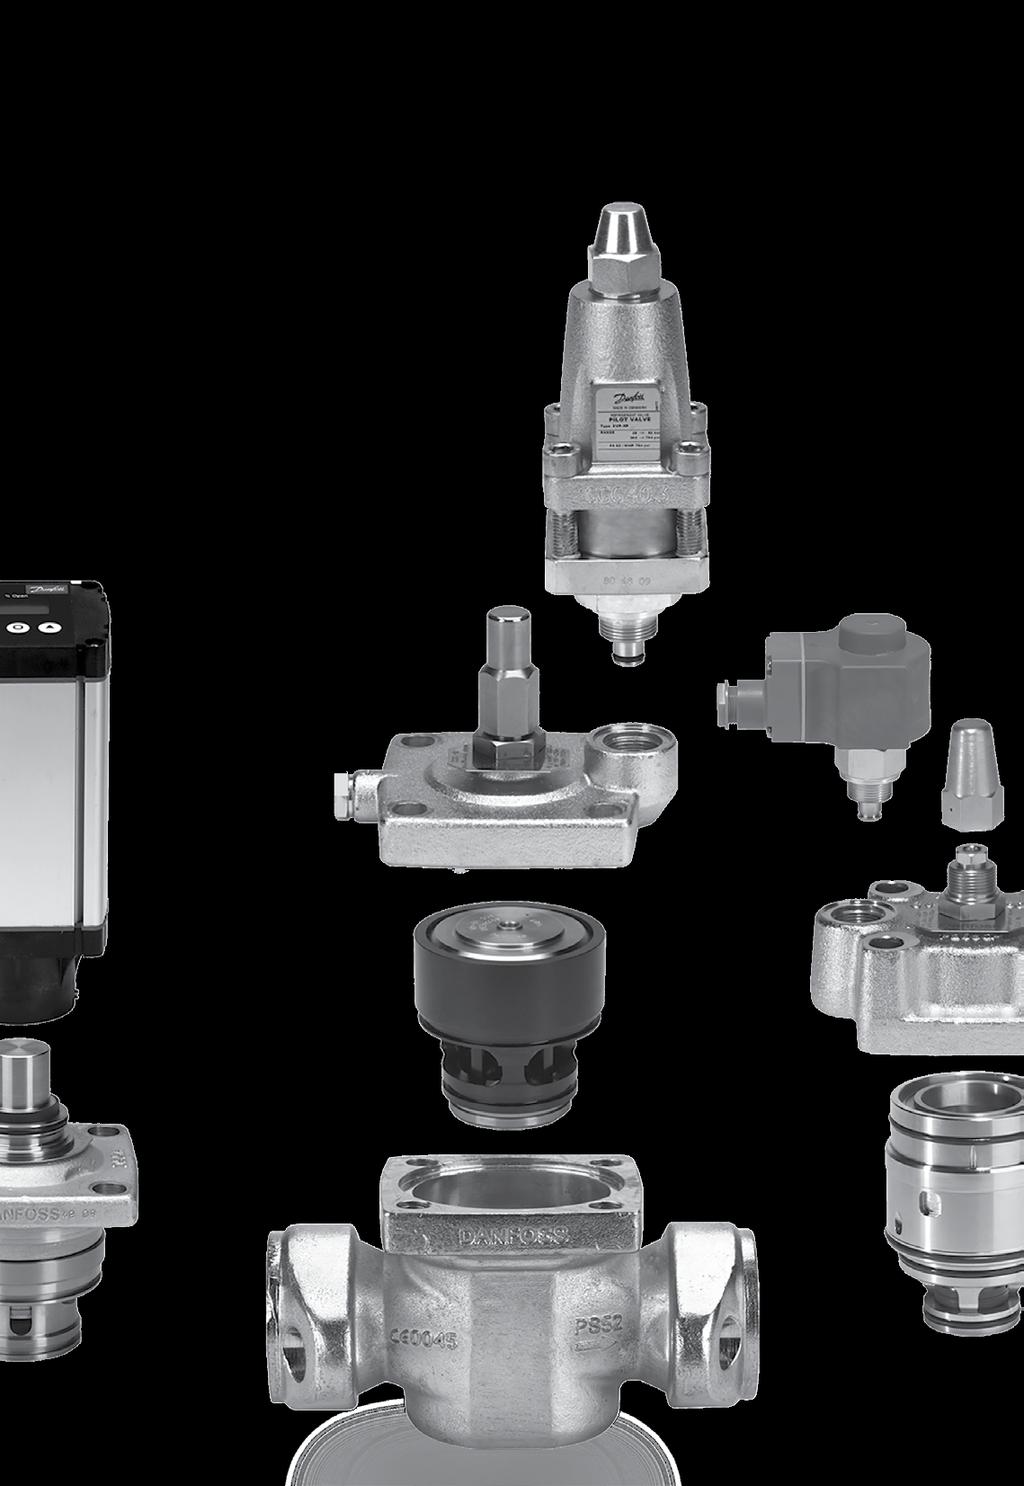 ICV with flanges: Retrofit made easy Danfoss introduces the ICV valve with flanges as a full replacement for your PM valves.